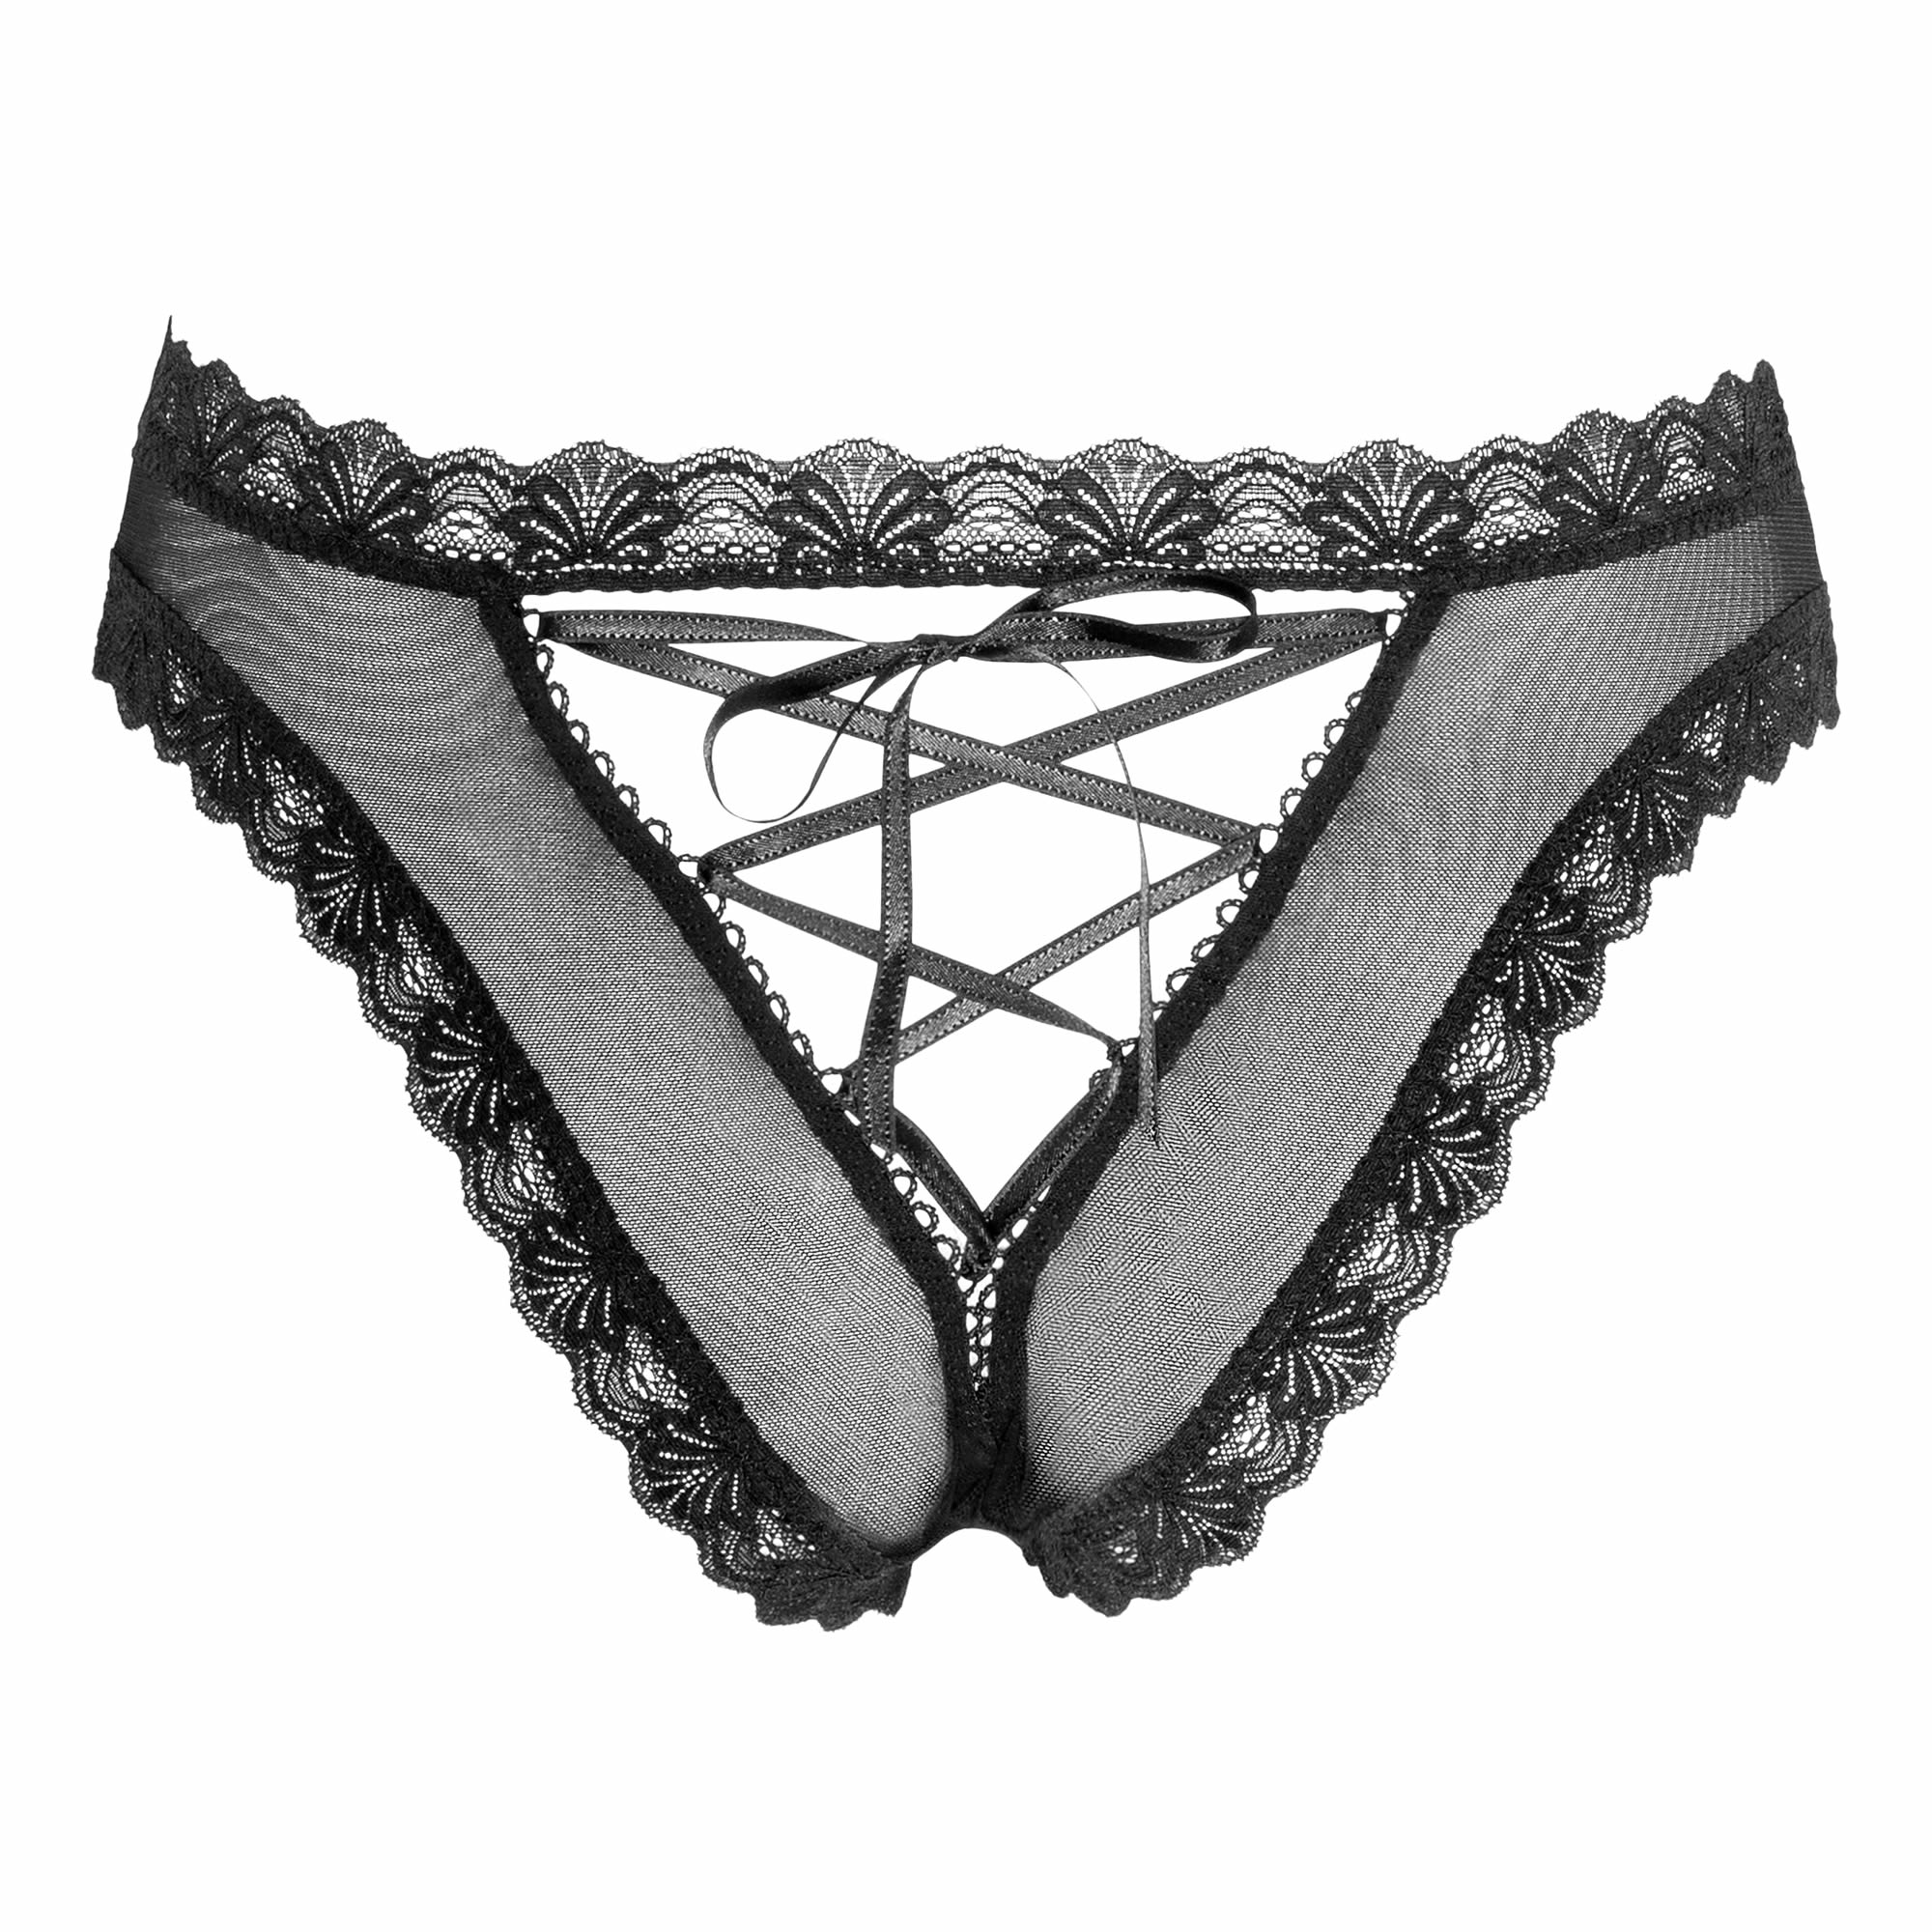 Lace Brief with Lacing